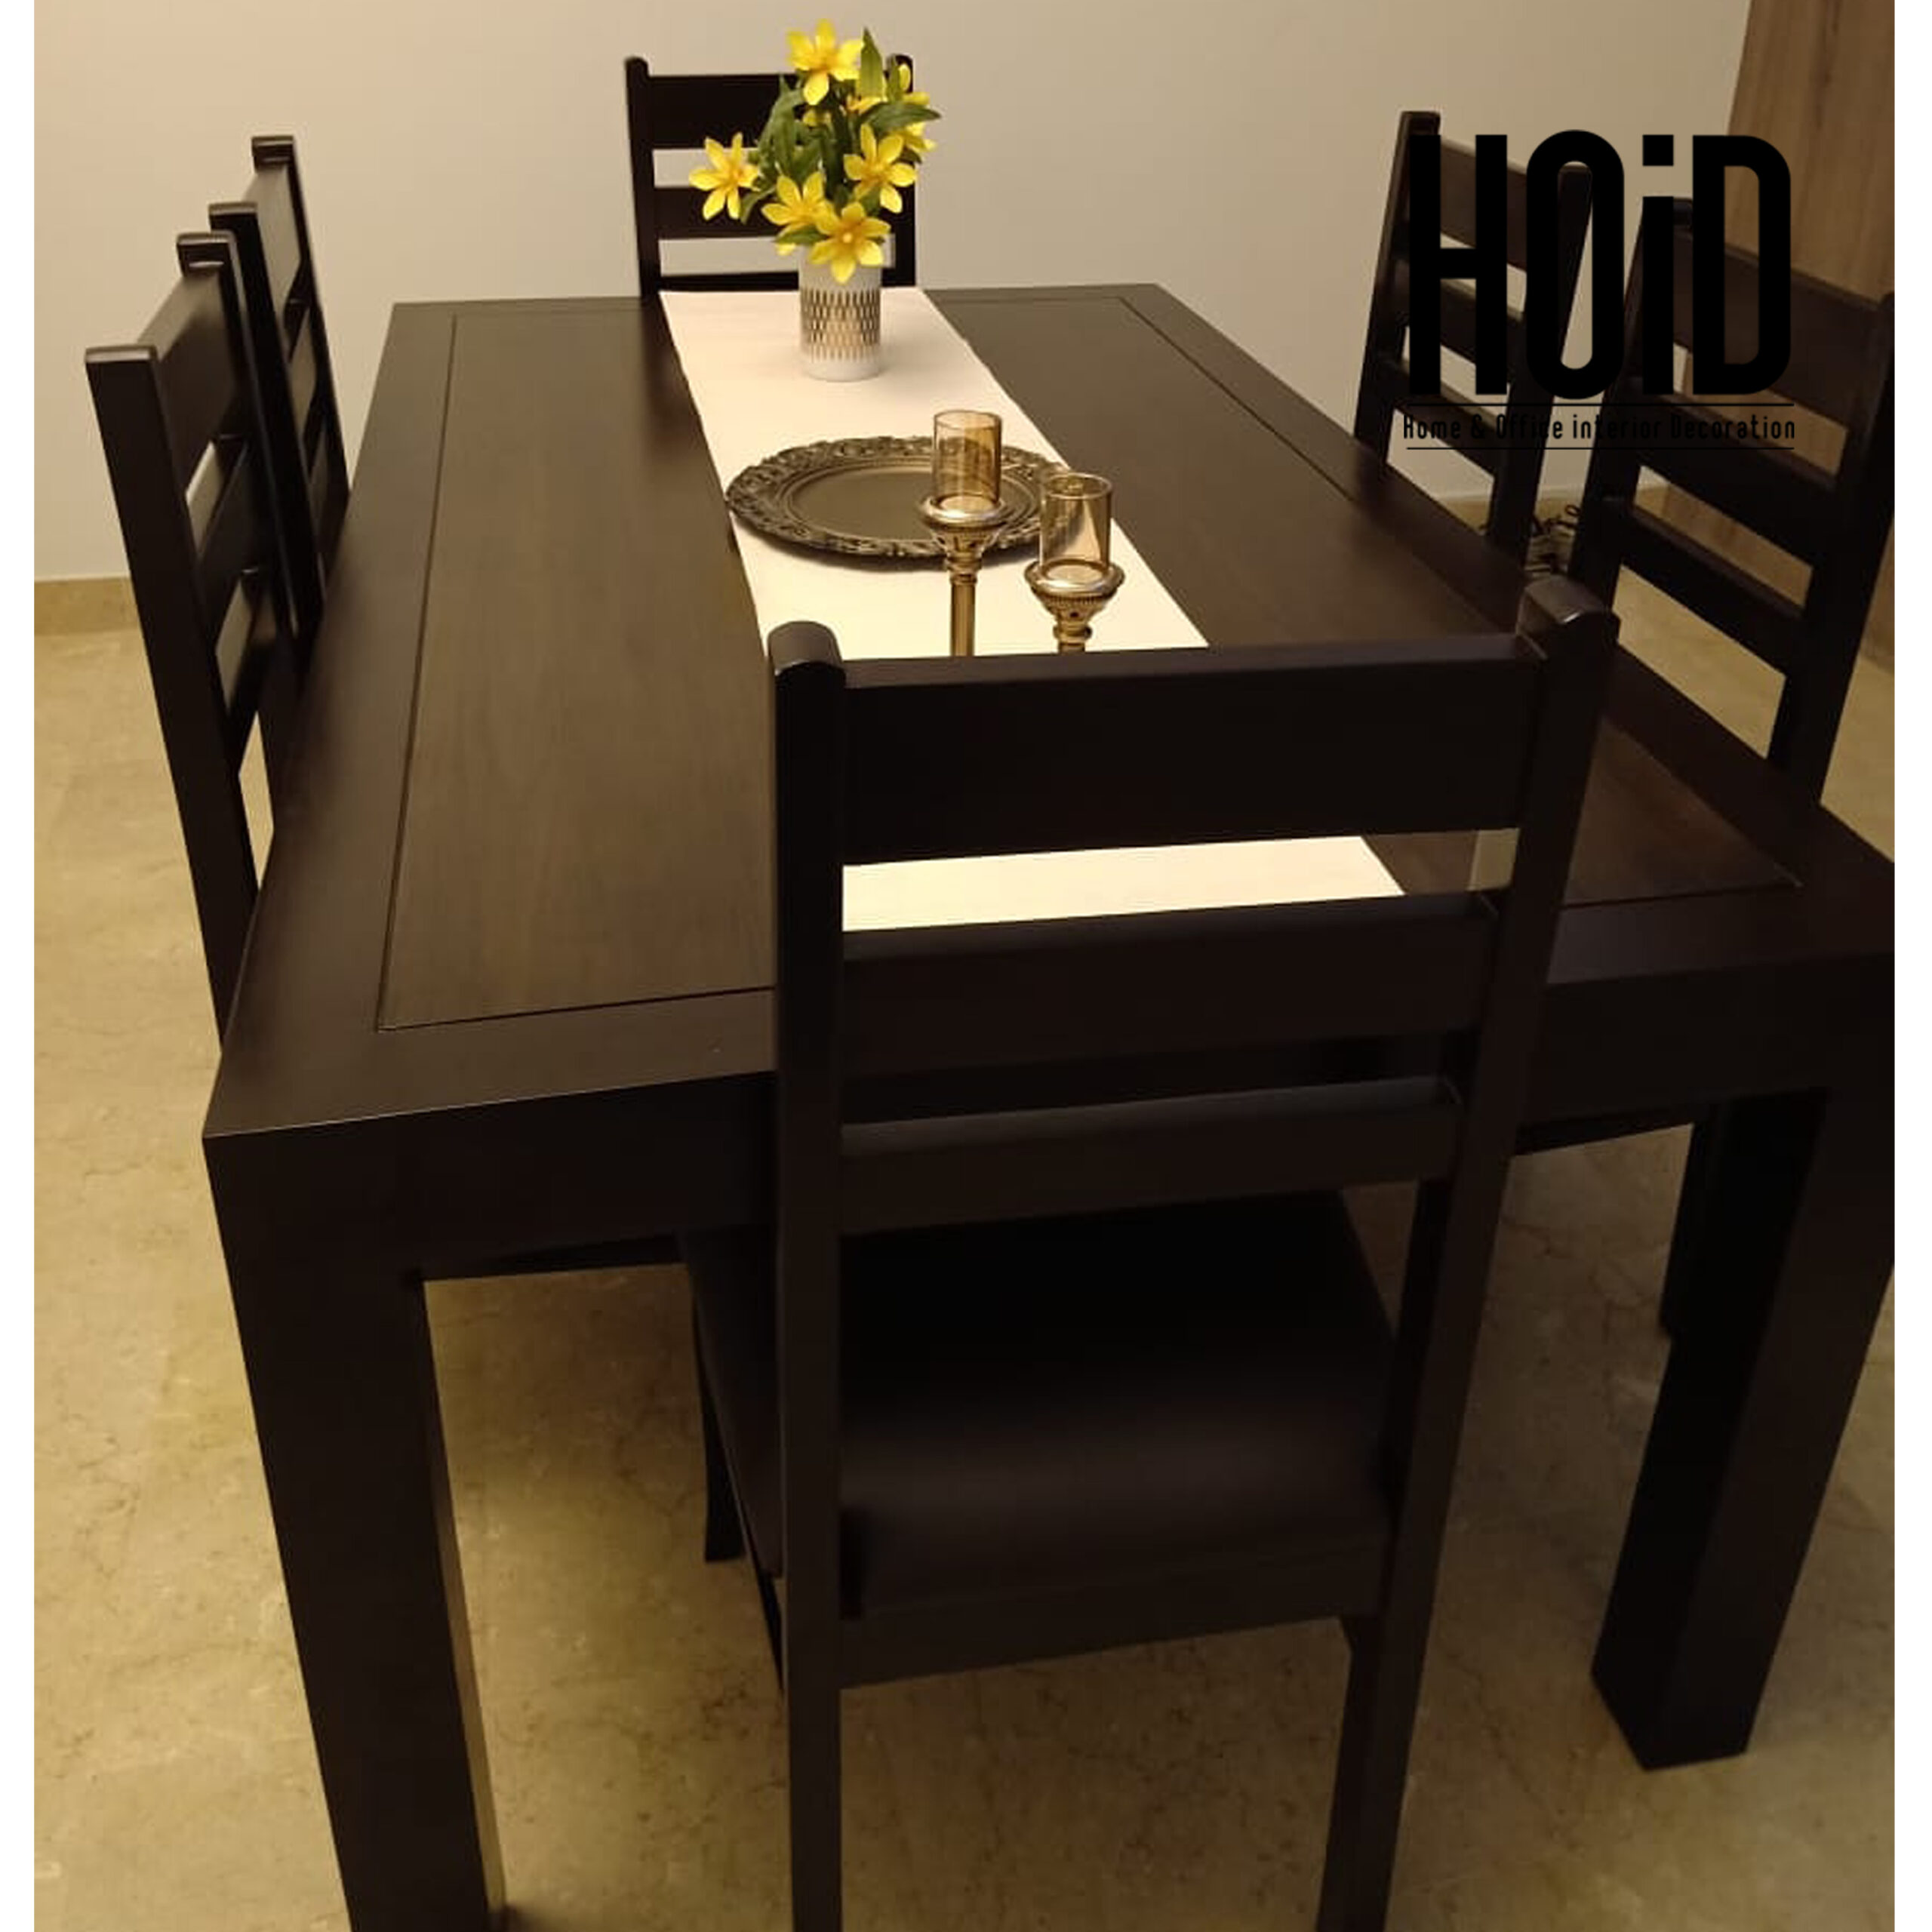 6 Seater Dining Table With Chairs, How Big Is A 6 Seater Round Table